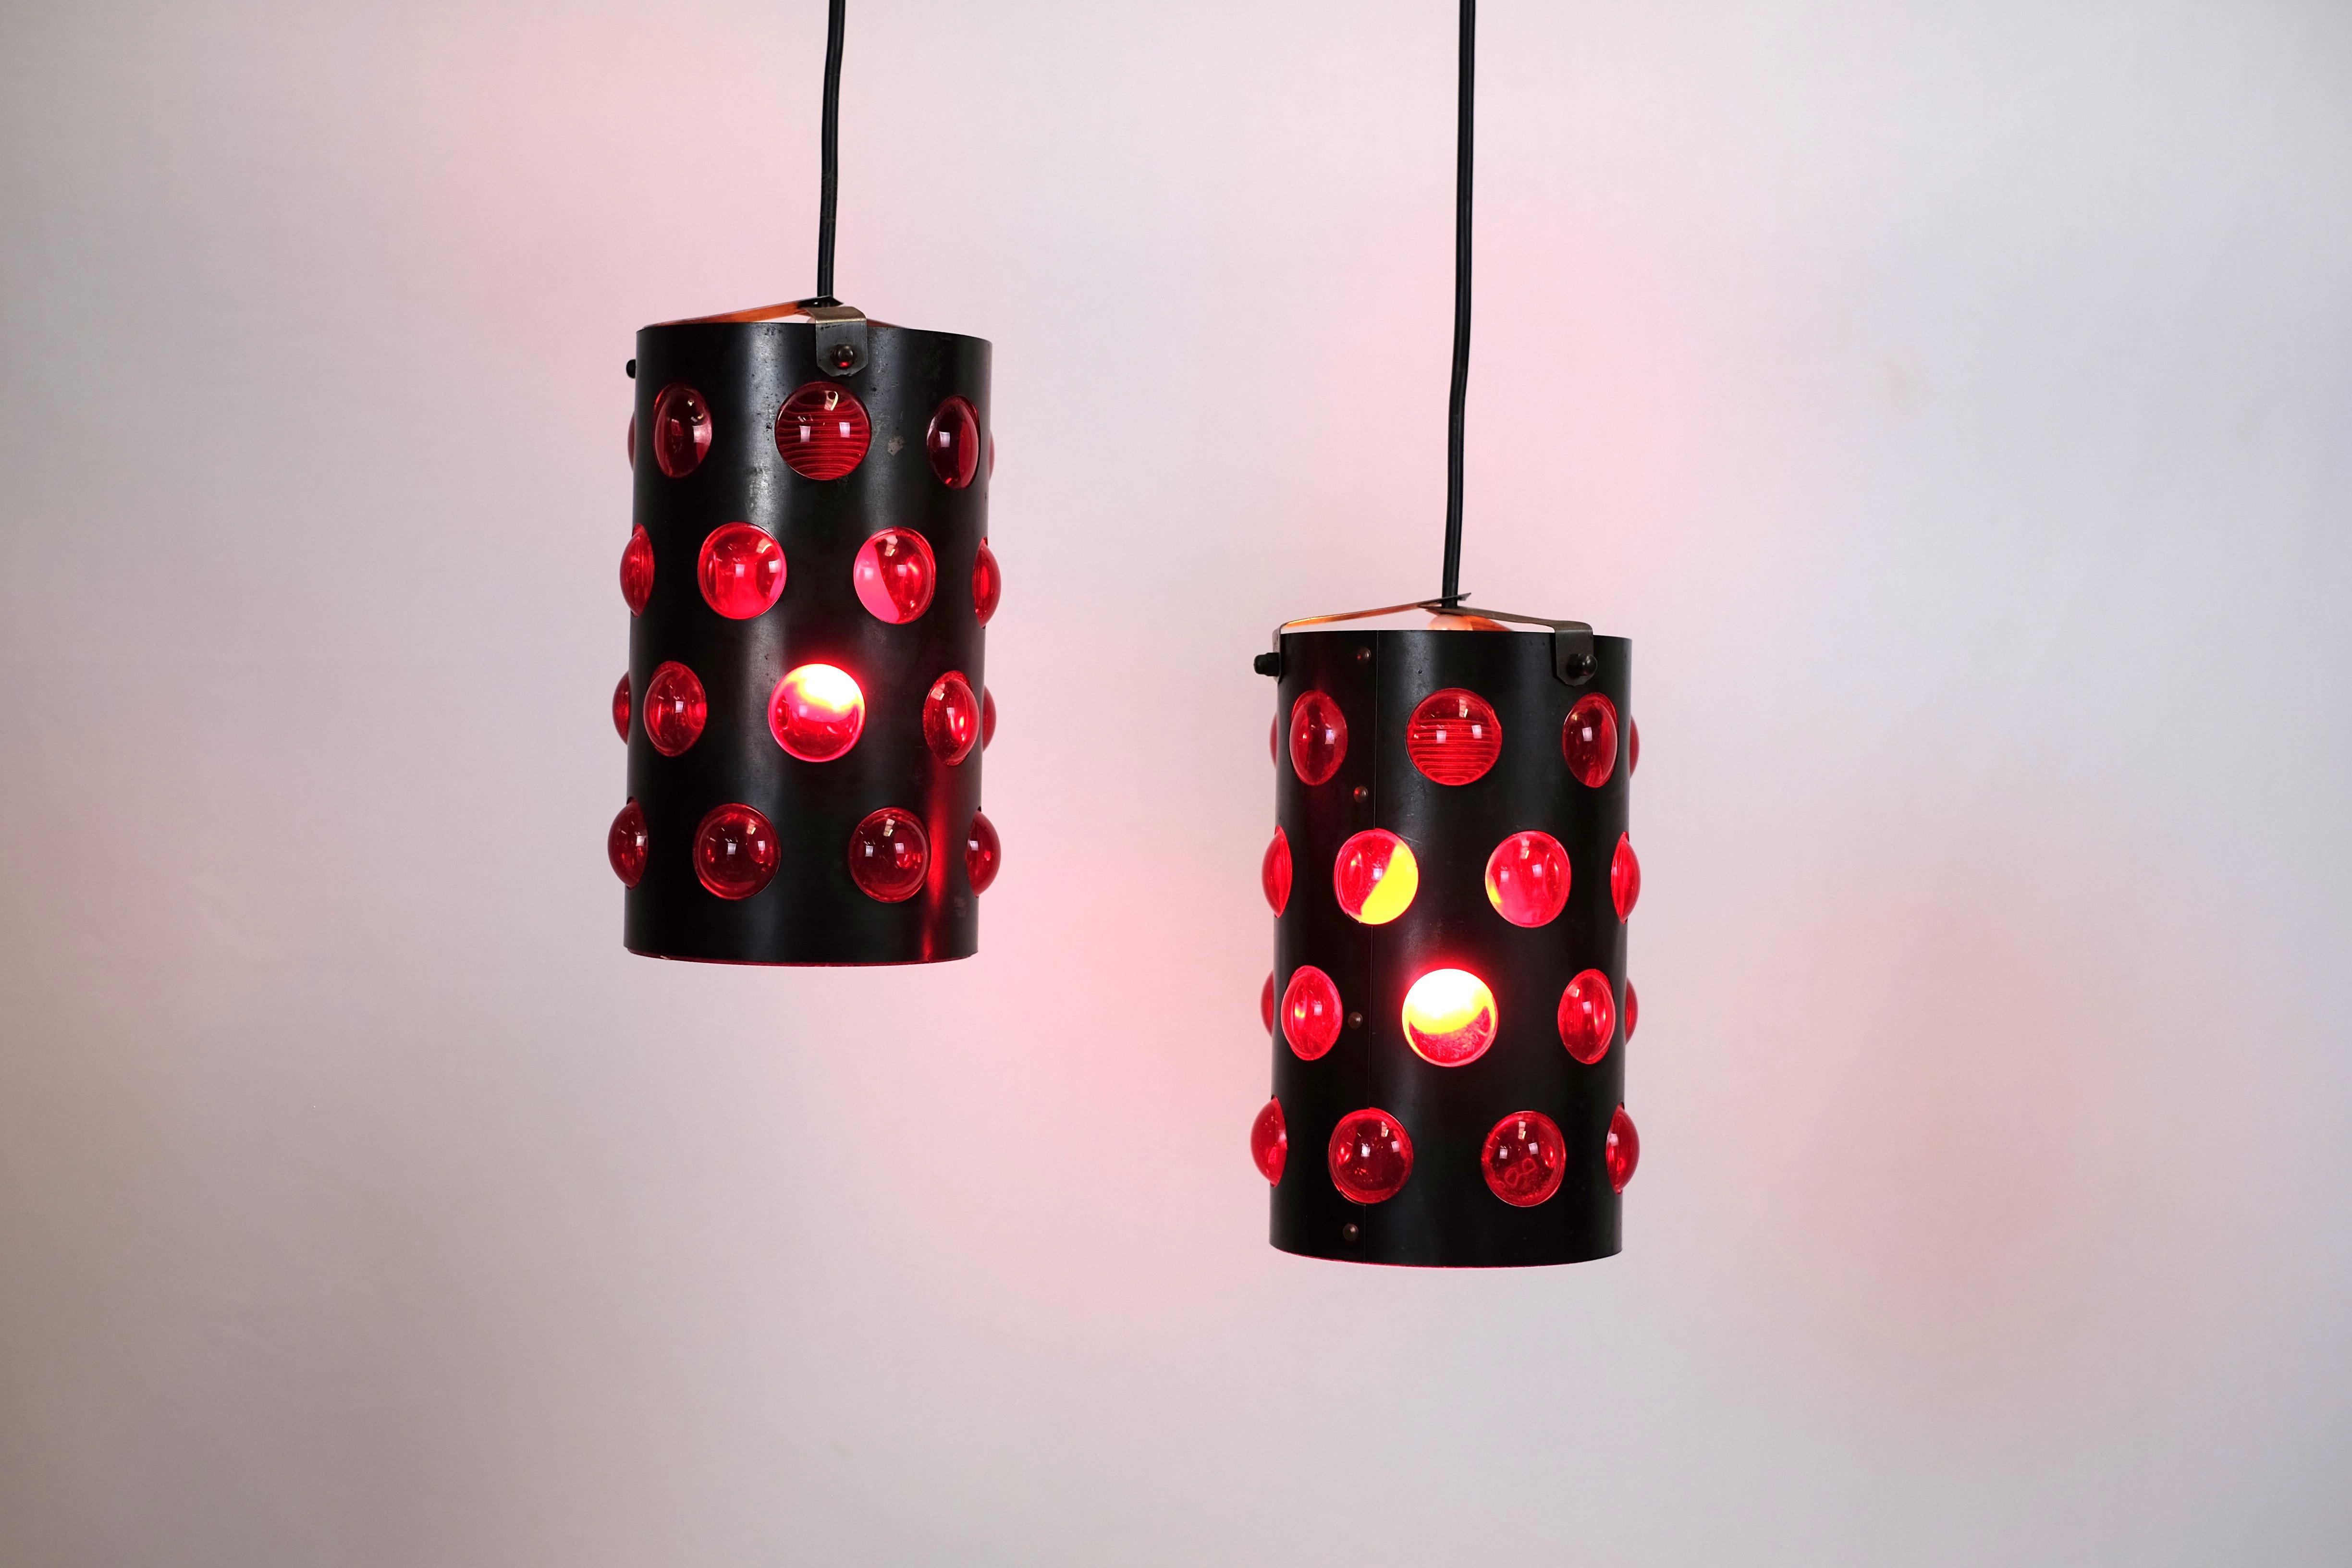 A pair of fun and charming lamps in the very best retro style.
Cylinder shaped lamp with bubbles of red plastic that provides a cozy light.
Danish design, but I haven't been able to find the designer. They are both in good vintage condition.
 